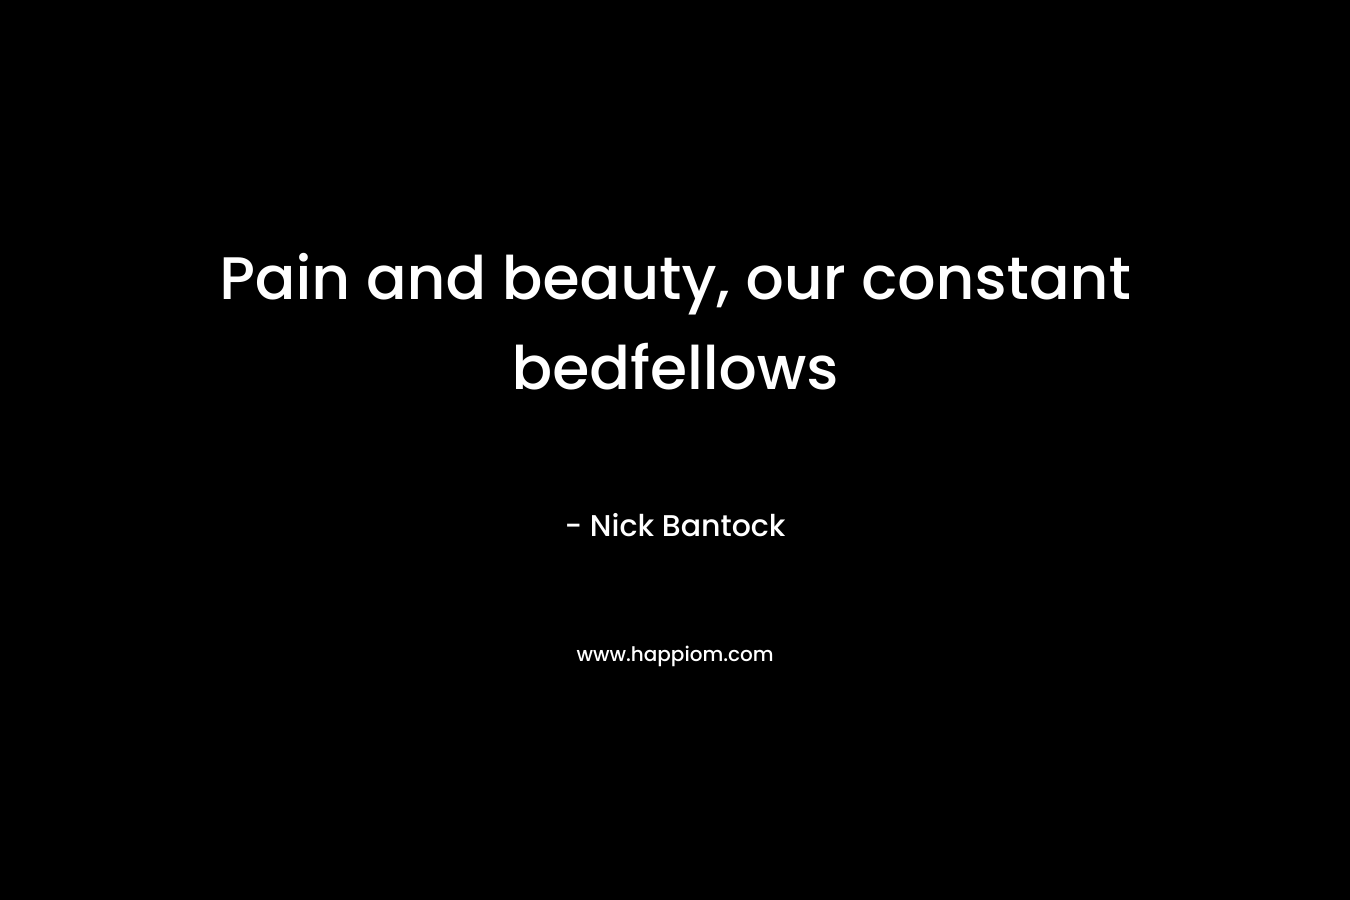 Pain and beauty, our constant bedfellows